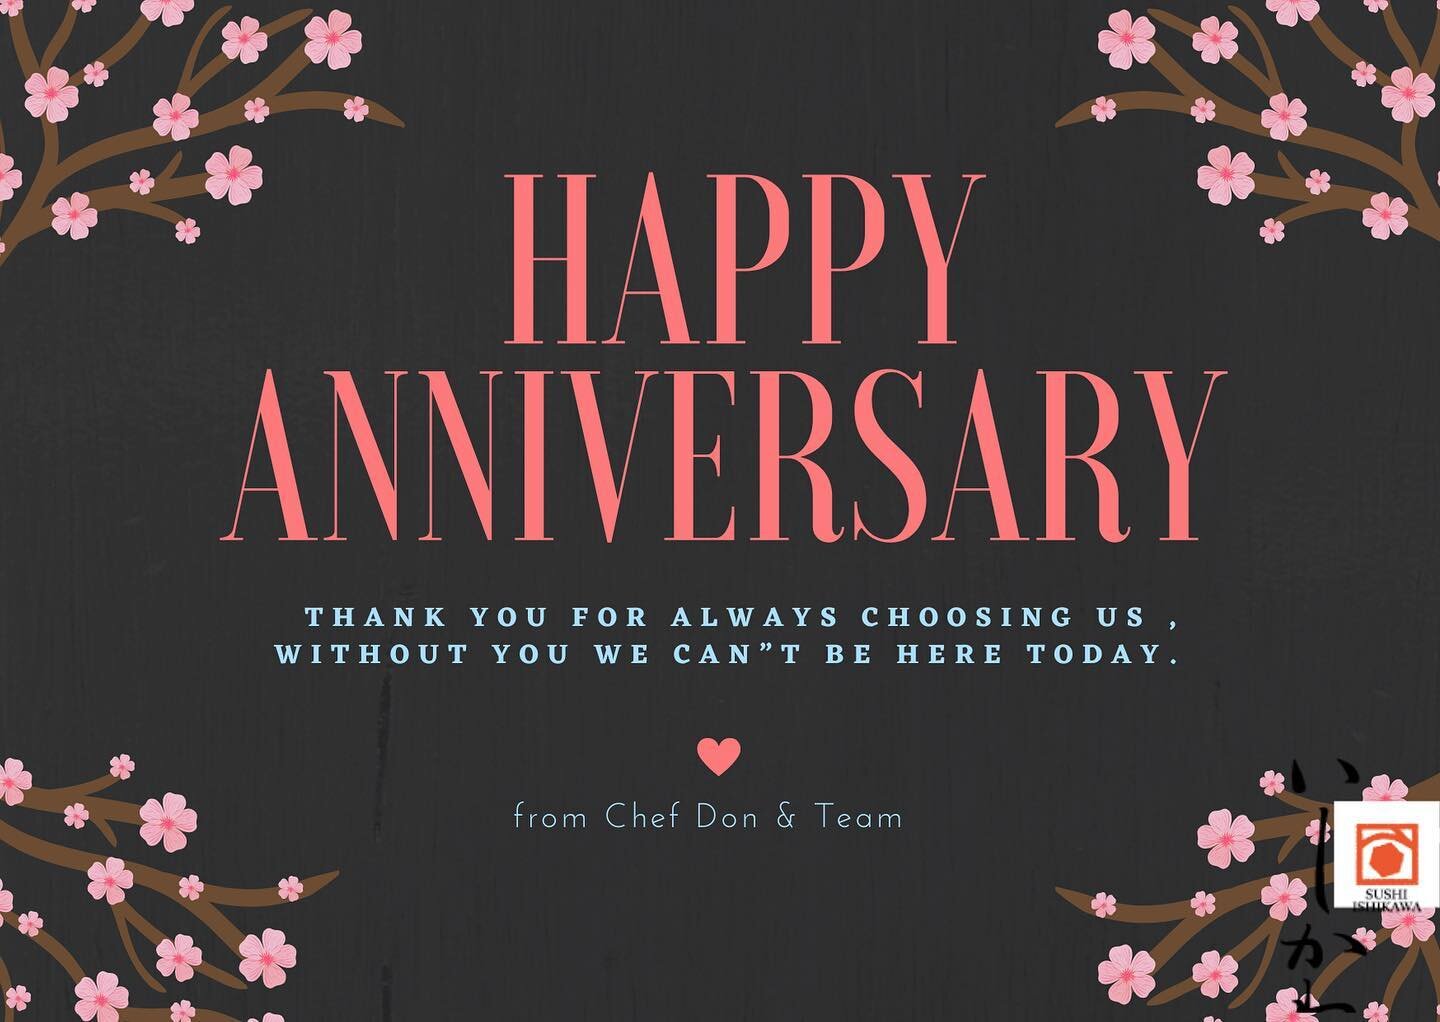 ❤️ Happy 4th anniversary 🎉🥳🍾

💓 To our lovely Team, thank you for sharing our love and passion. Your dedication continues to make us who we are.💓 

💗 To our dearest guests, we thank you for your love. We are grateful for your continued support 